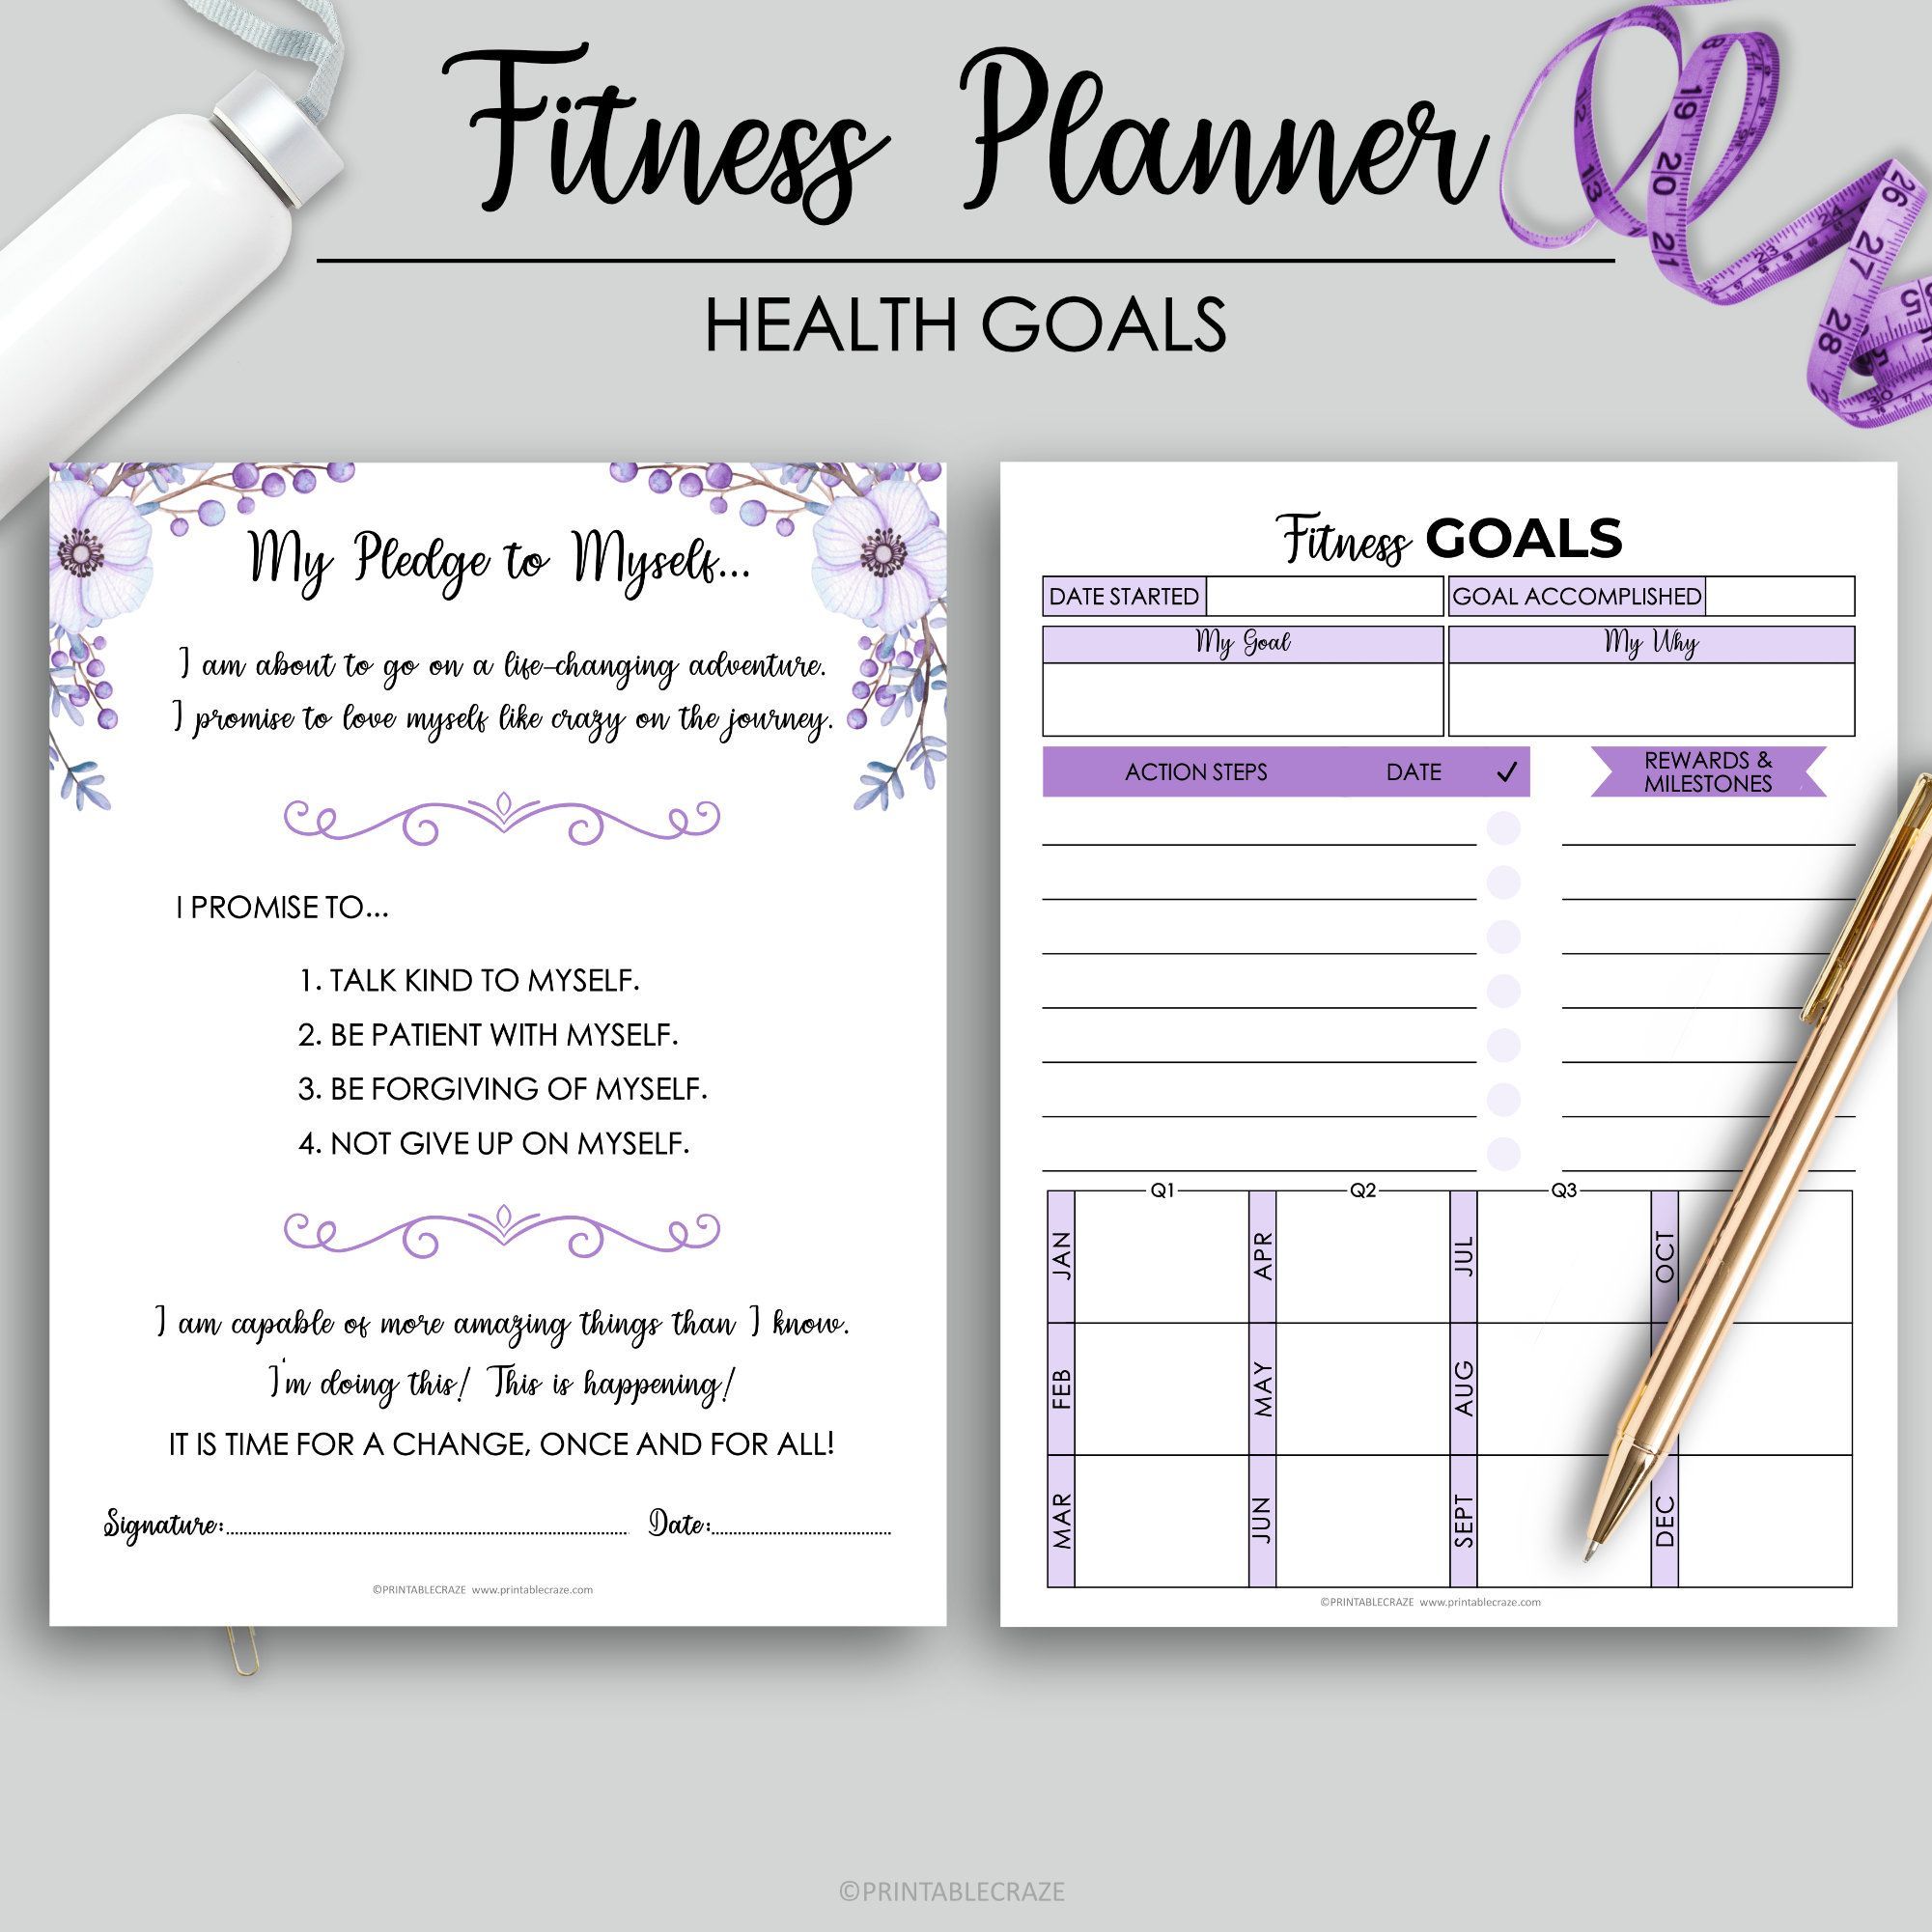 Fitness Planner Printable Weight Loss Health Planner Fitness Journal Workout Log Food Diary Calorie Tracker Daily Weight Loss Step Tracker - Fitness Planner Printable Weight Loss Health Planner Fitness Journal Workout Log Food Diary Calorie Tracker Daily Weight Loss Step Tracker -   17 fitness Planner printable ideas